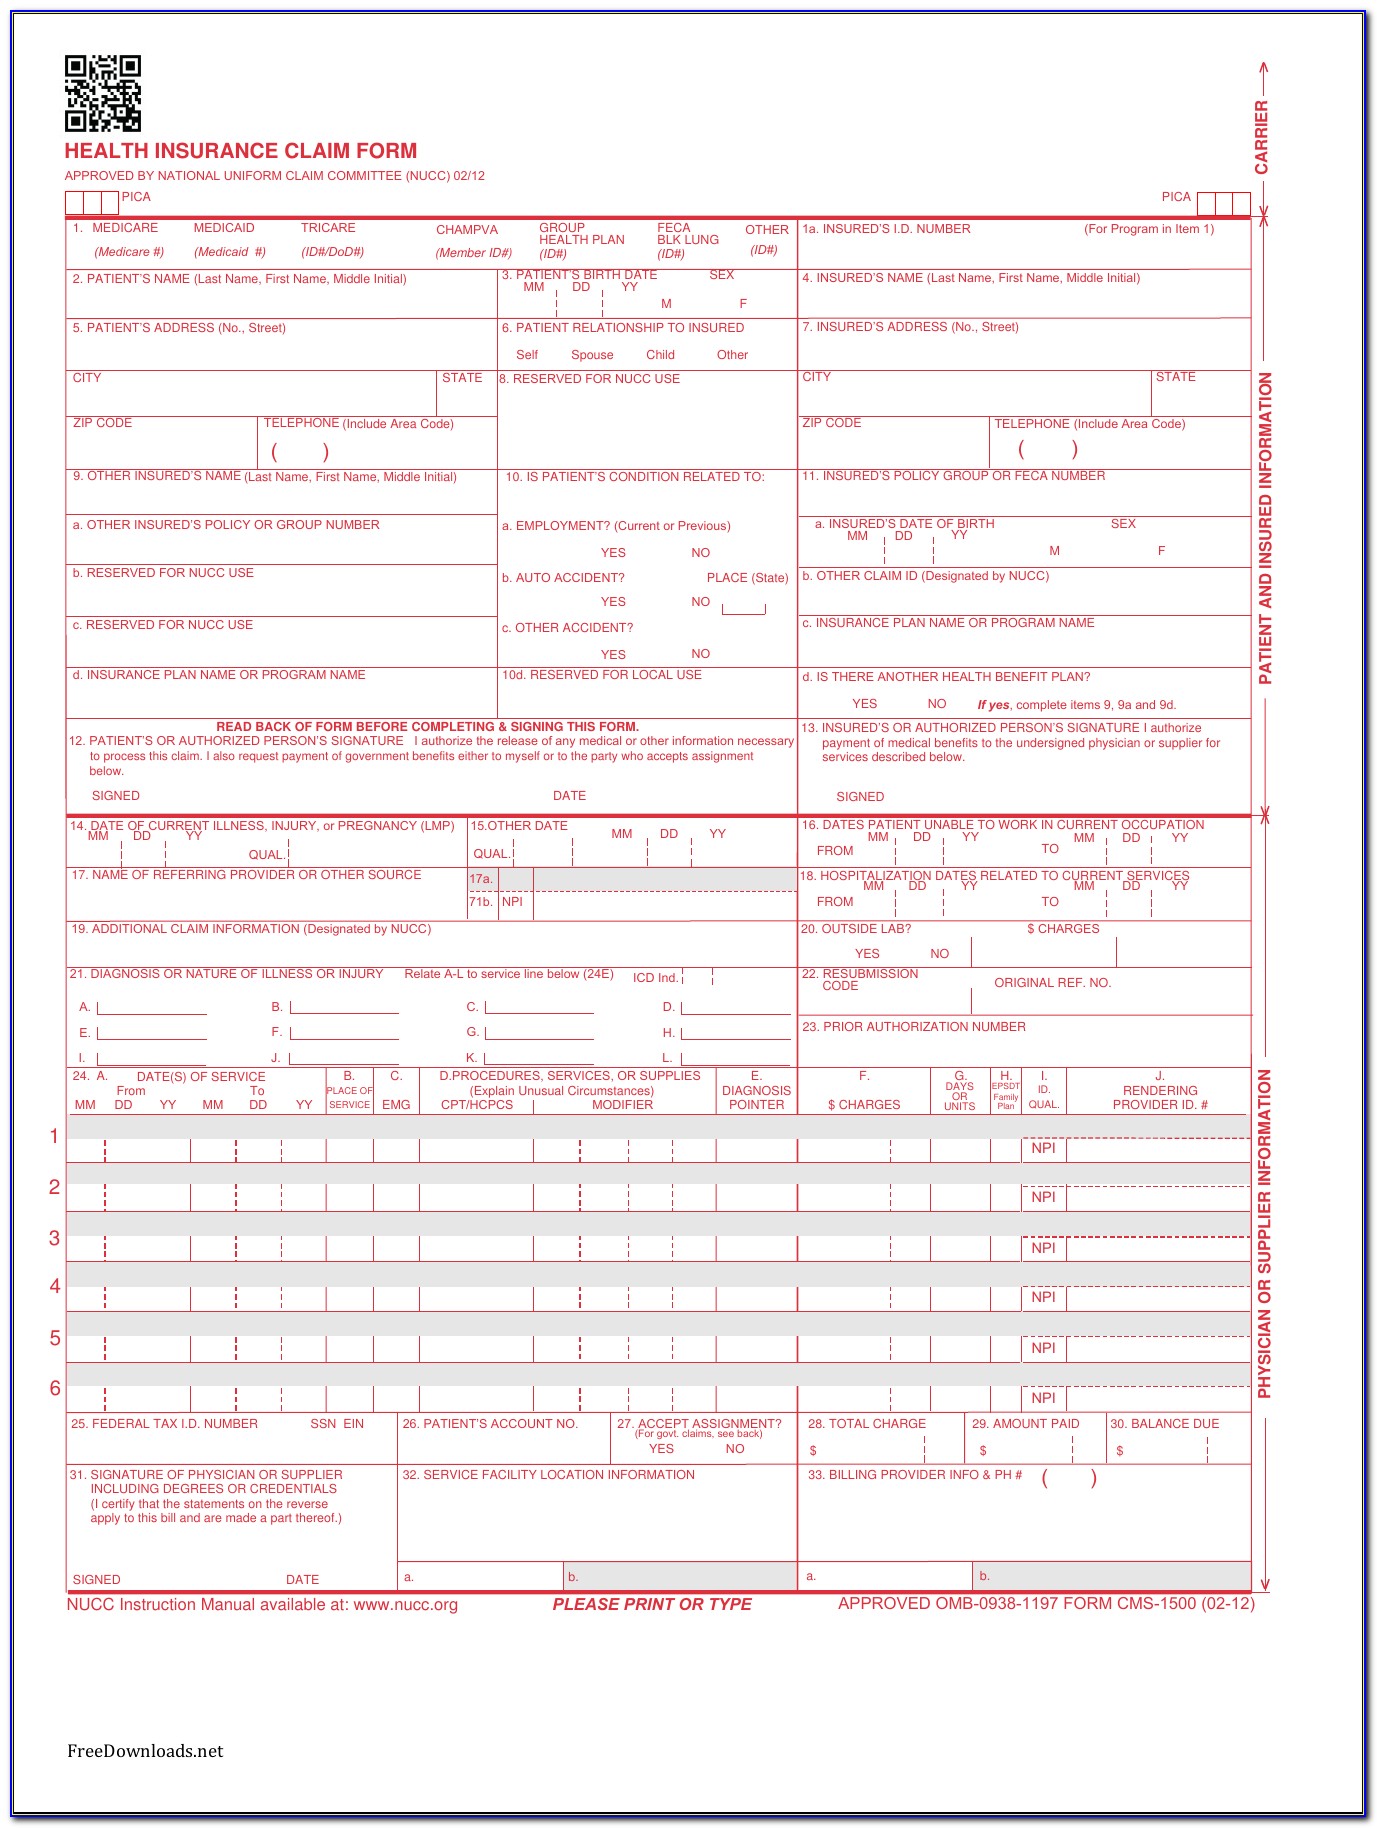 Cms 1500 Forms 2017